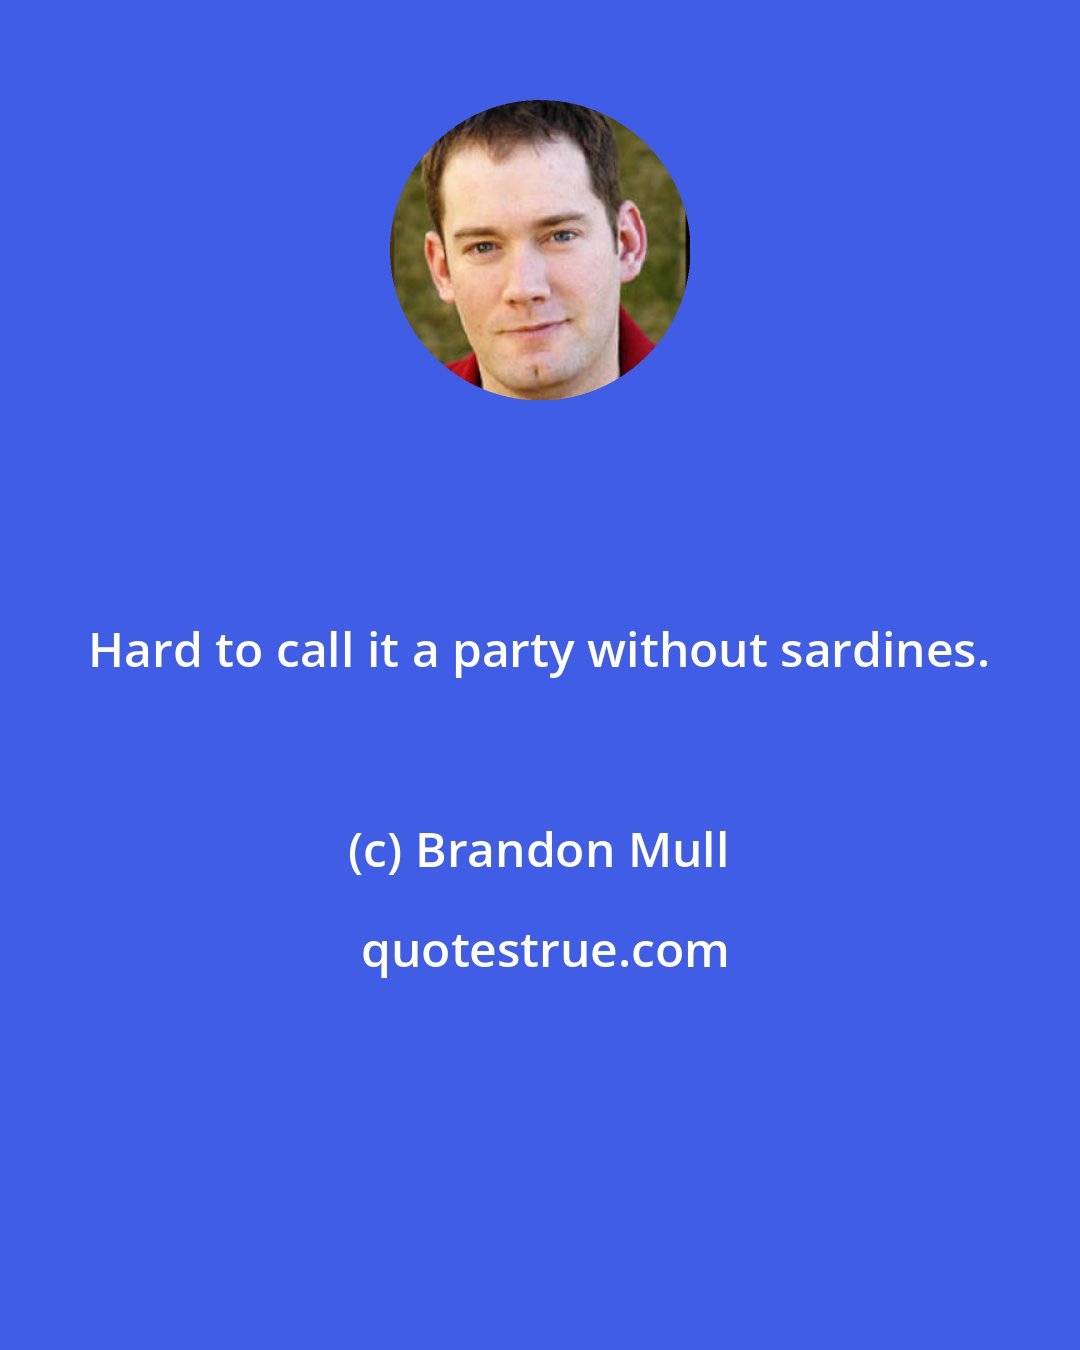 Brandon Mull: Hard to call it a party without sardines.